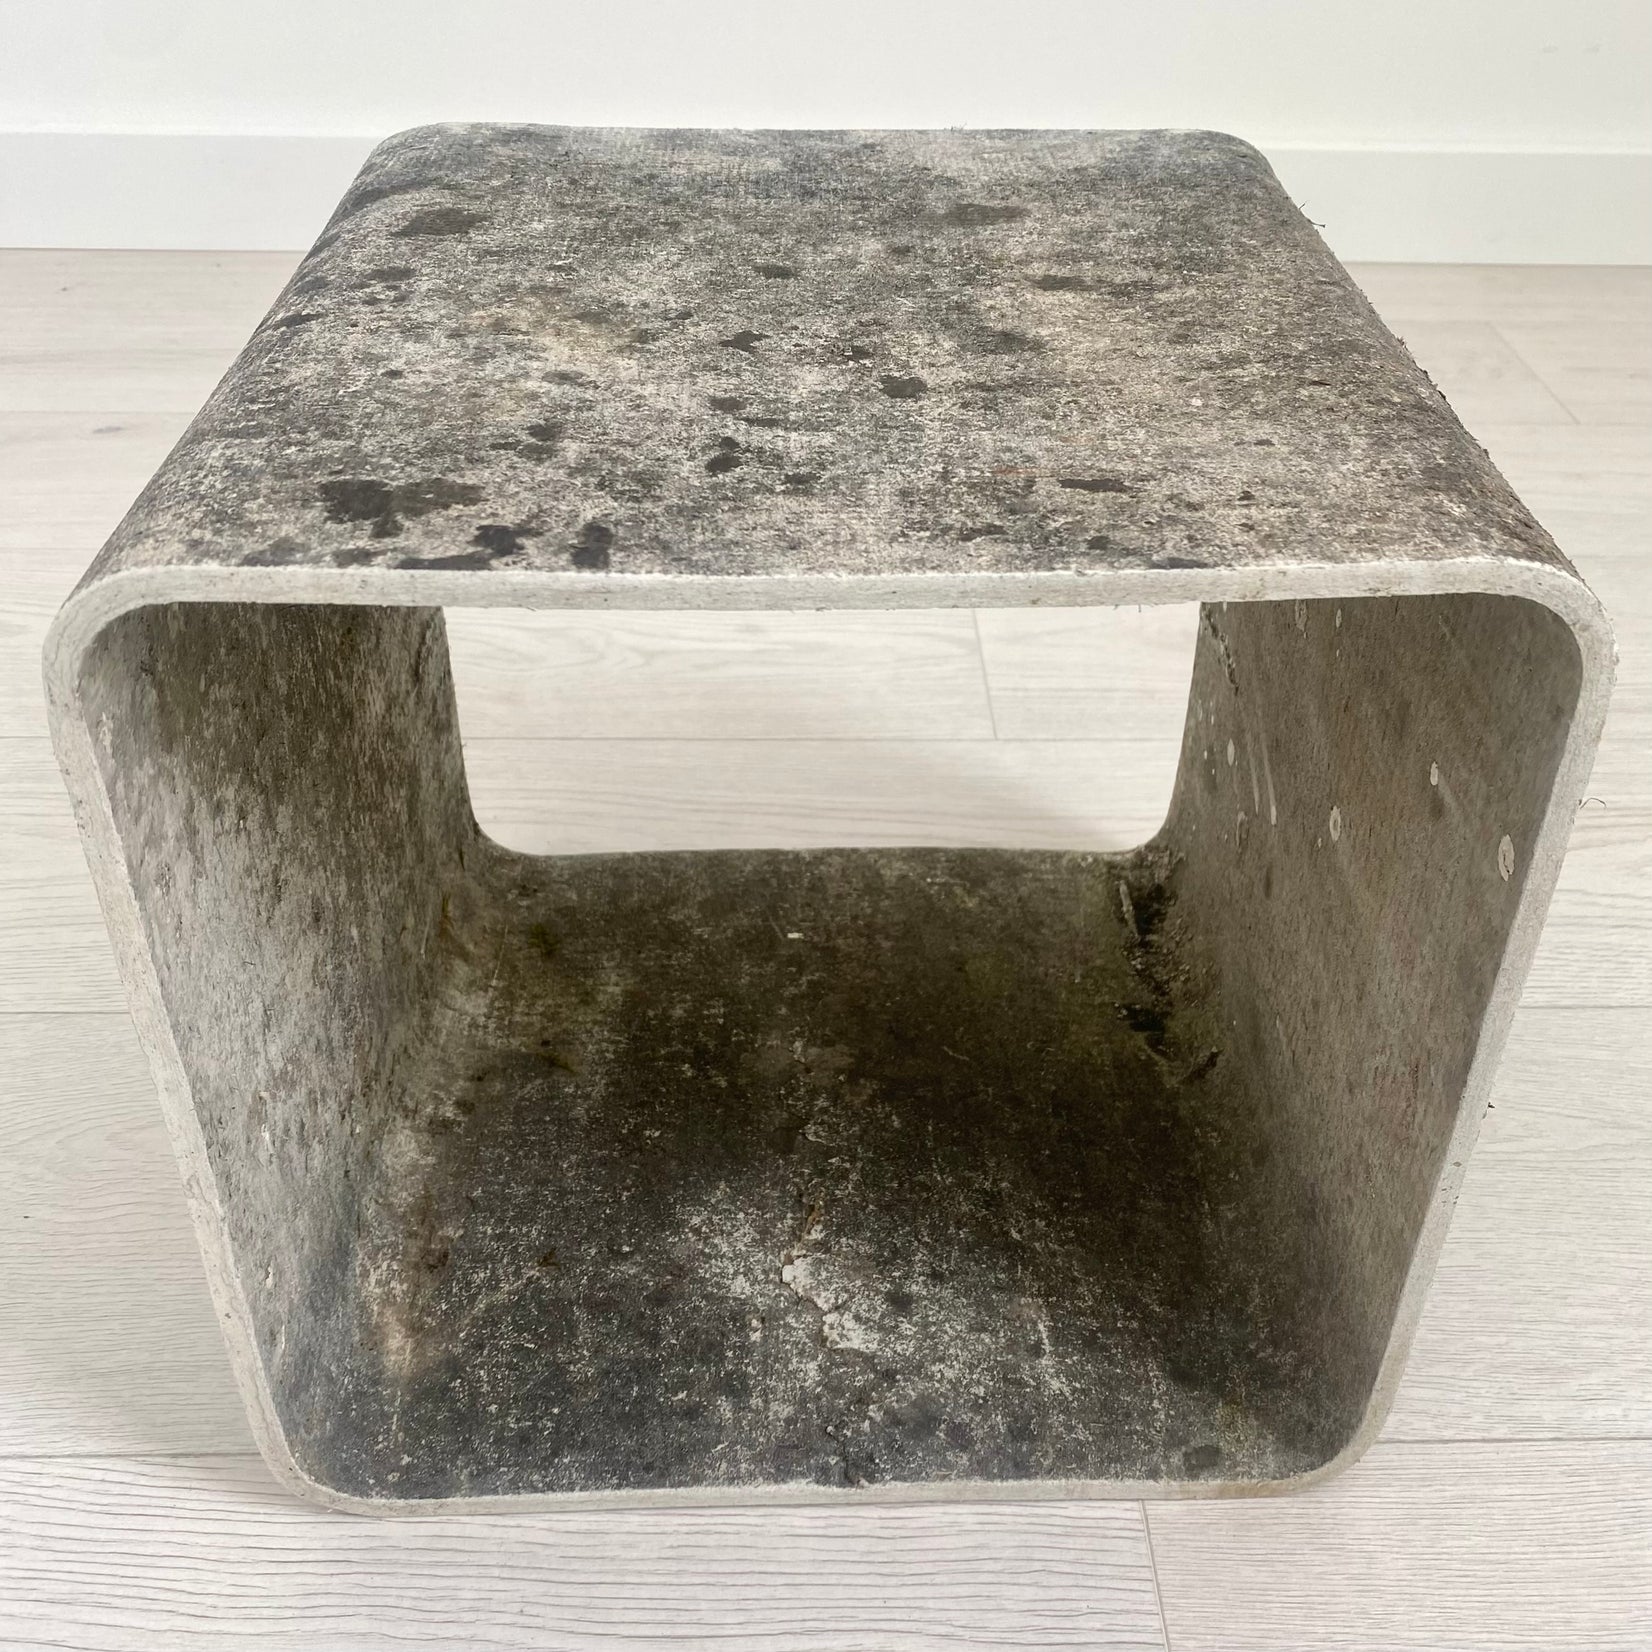 Willy Guhl Concrete Cube Side Table, 1960s Switzerland